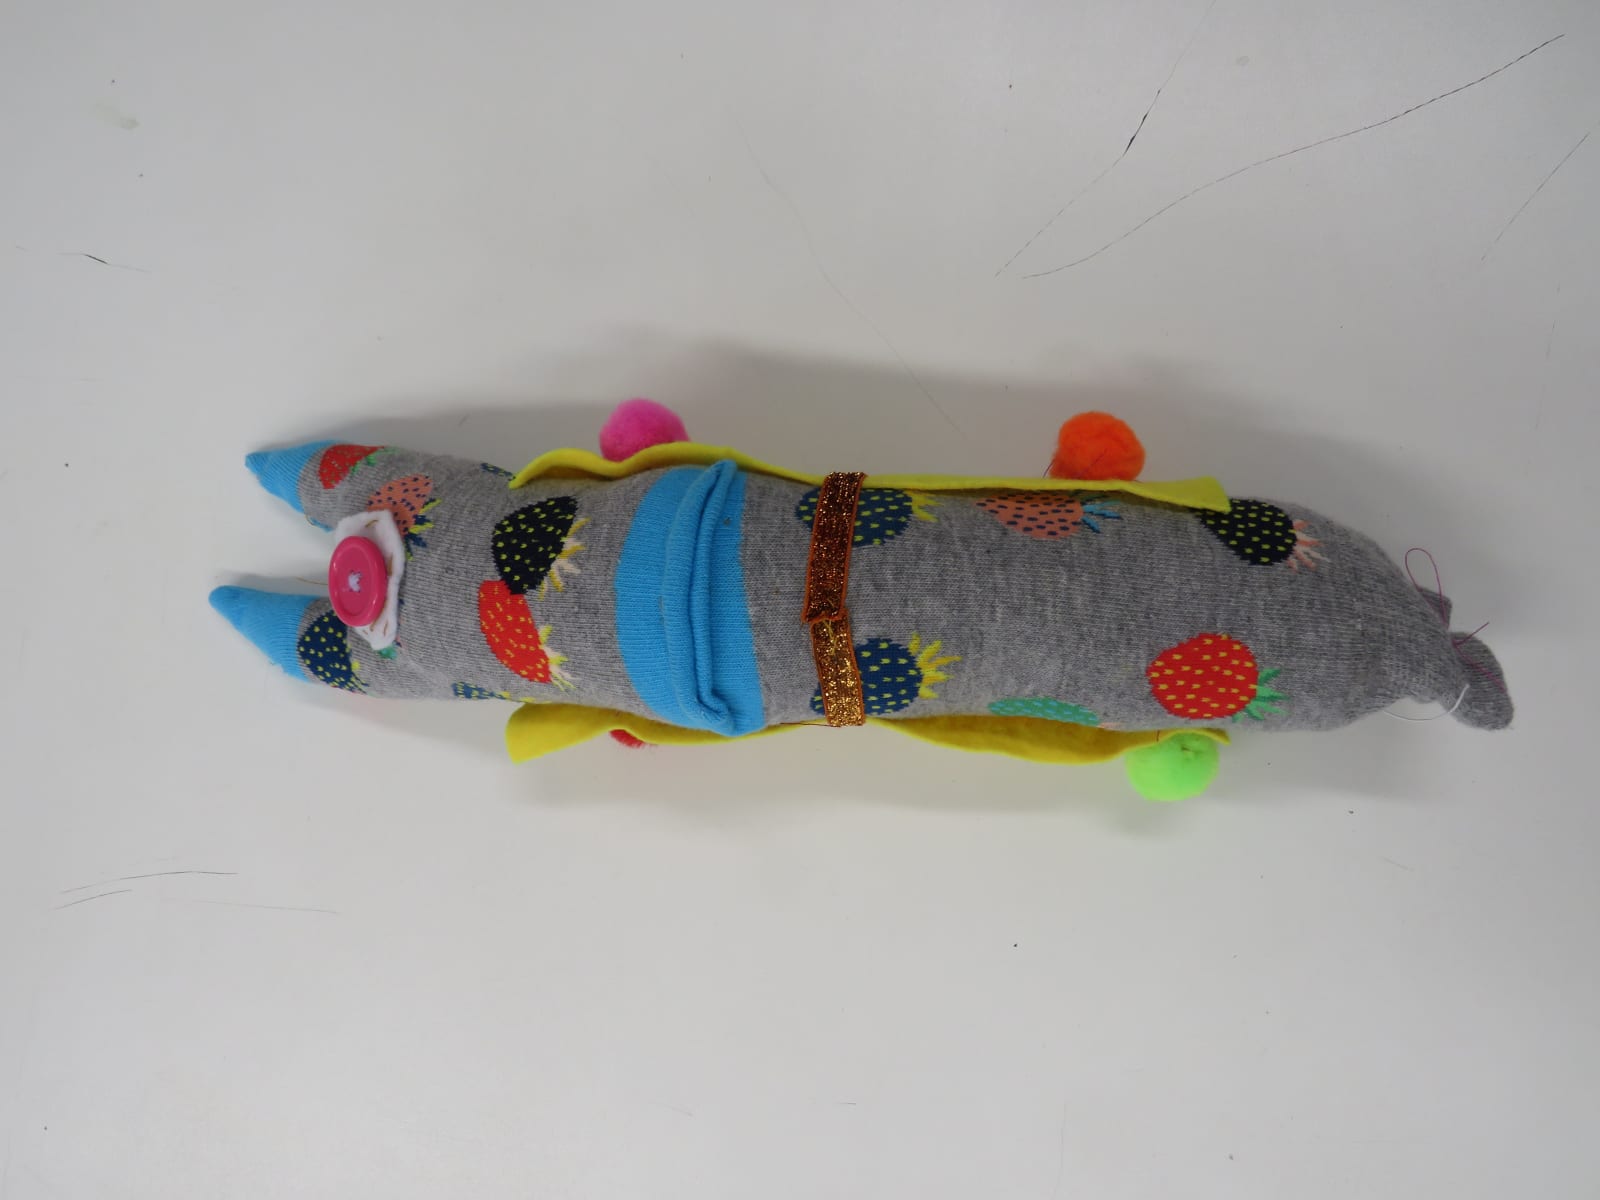 Thursday 28th July 10 am – 12 pm Make your own hand puppets Come create a character with fabric and decorations. We will be making hand puppets that you can later play with or use in a play!